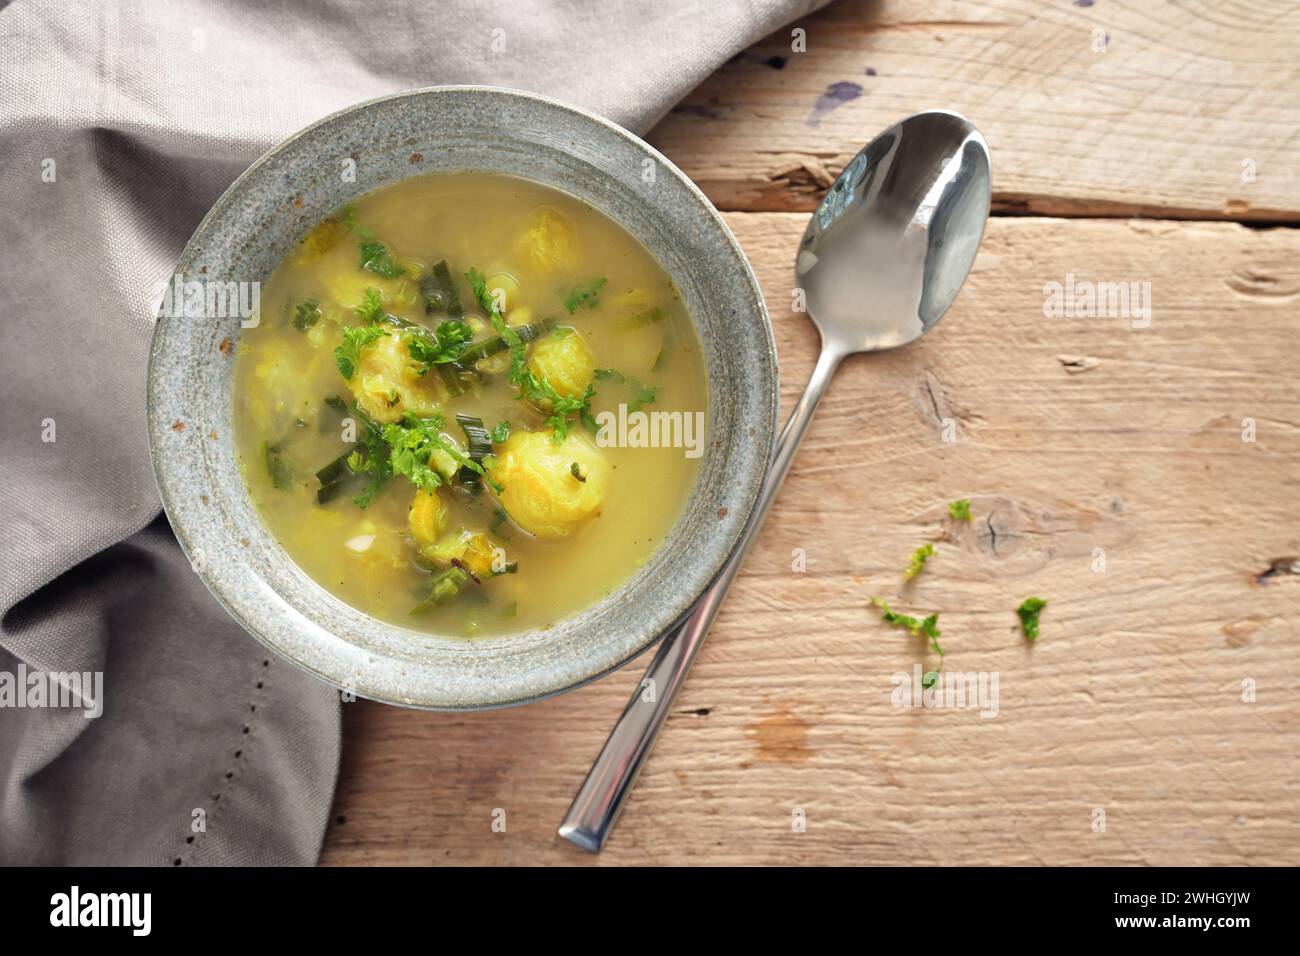 Vegetable soup with brussels sprout, leek and potato in a bowl, spoon and napkin on a rustic wooden table, high angle view from Stock Photo